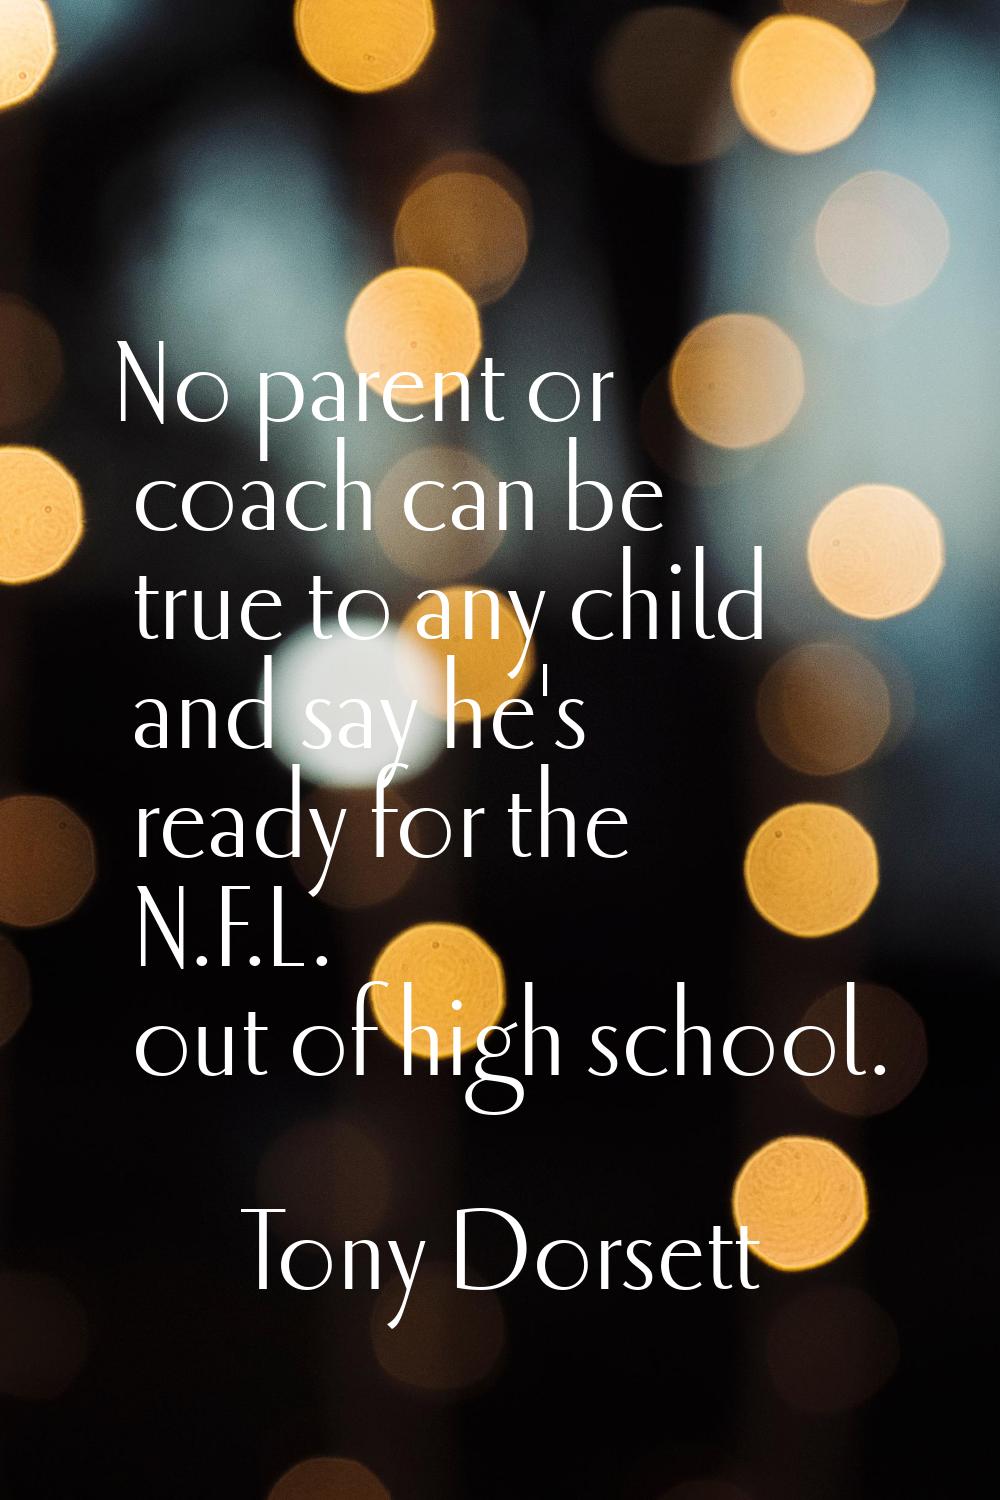 No parent or coach can be true to any child and say he's ready for the N.F.L. out of high school.